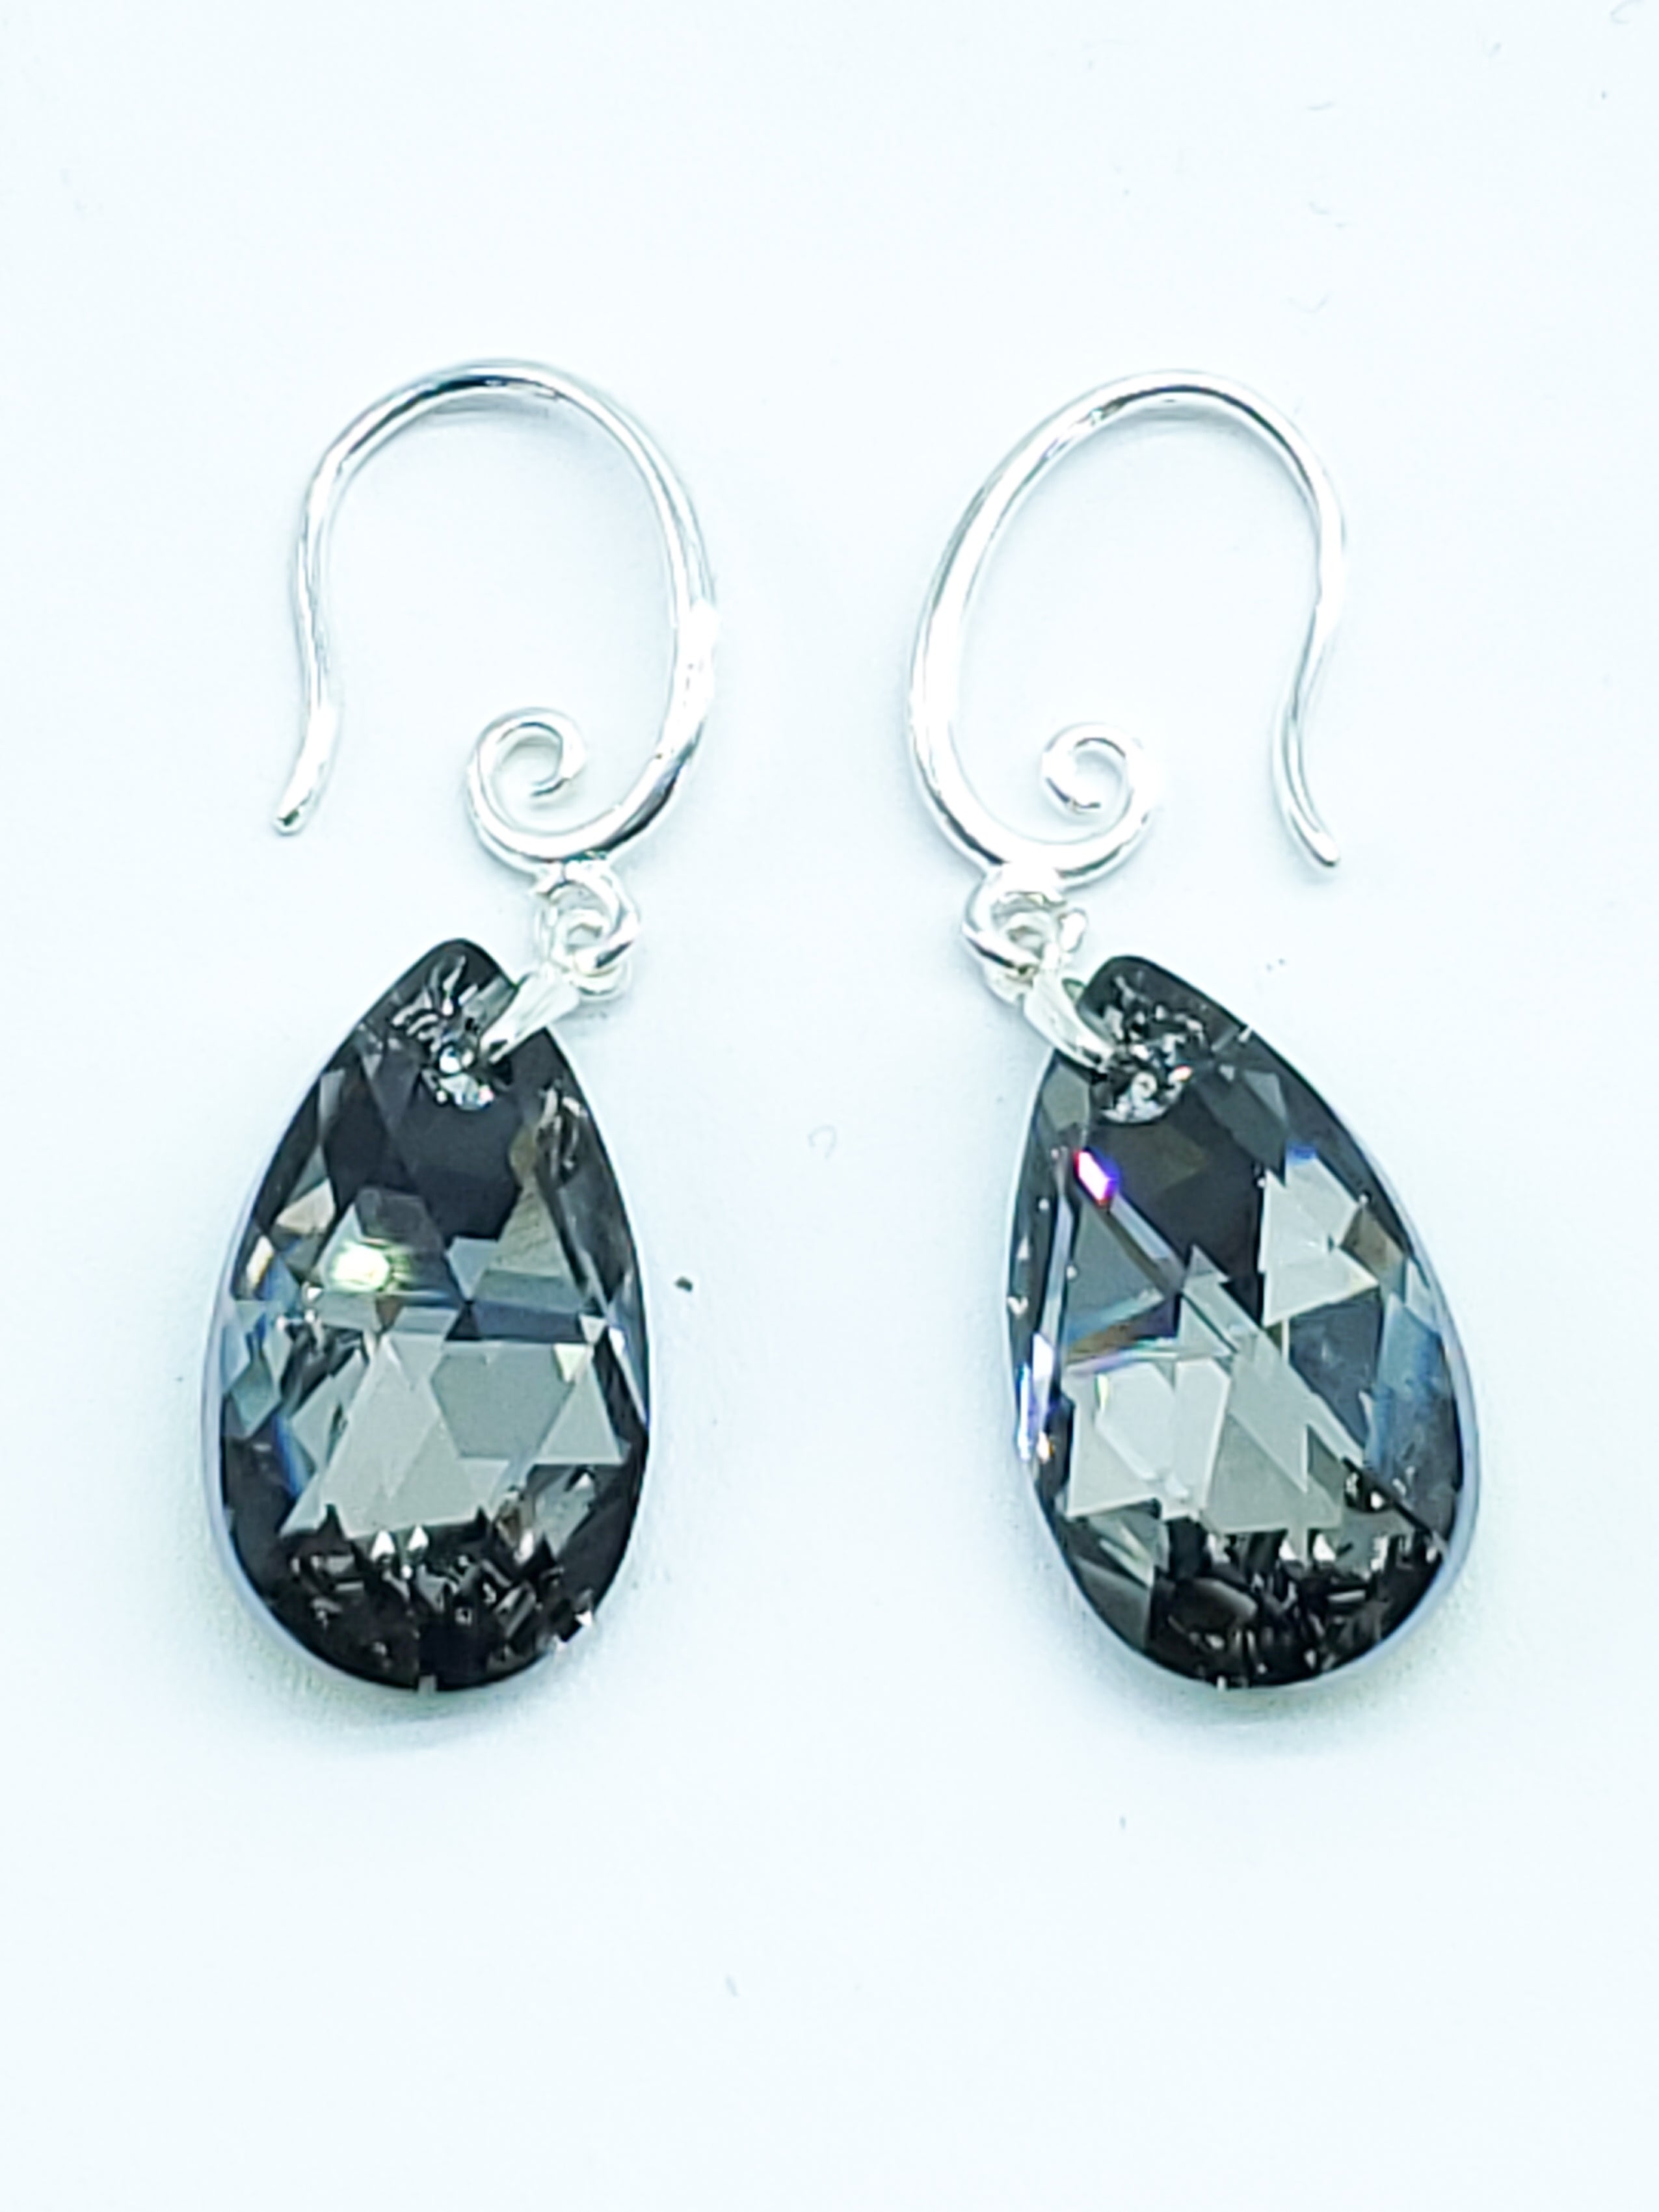 "Crystal Silver Night" Swarovski Crystal Earrings on Sterling Silver - The Caffeinated Raven